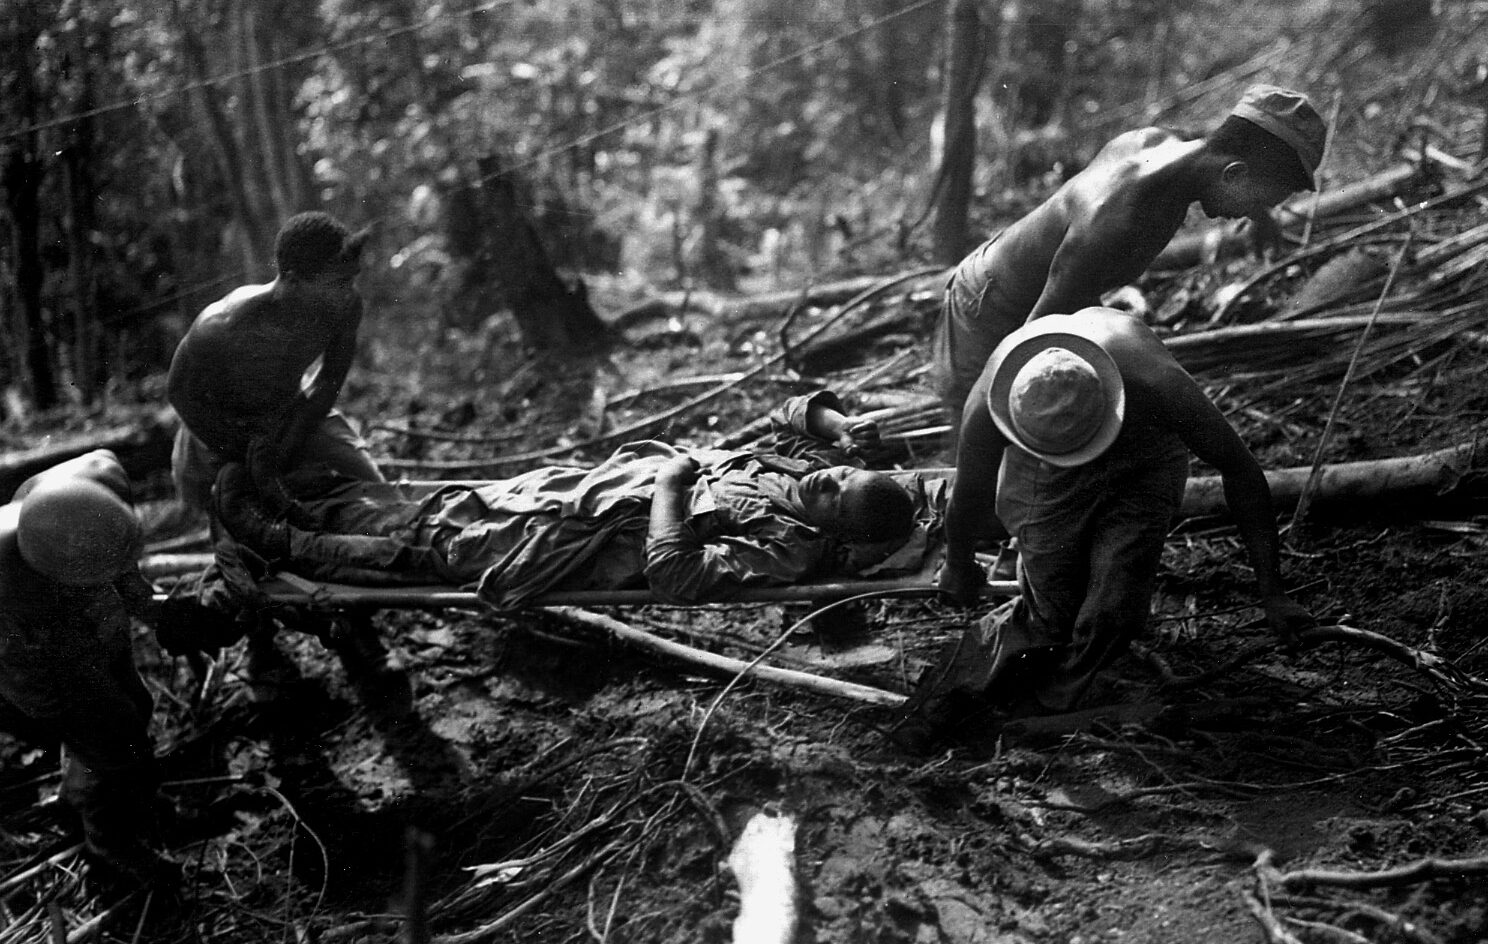 Litter bearers of Company K, 25th Regiment, 93rd Division struggle up Hill 290 on Bougainville with a wounded comrade during fighting on April 7, 1944.